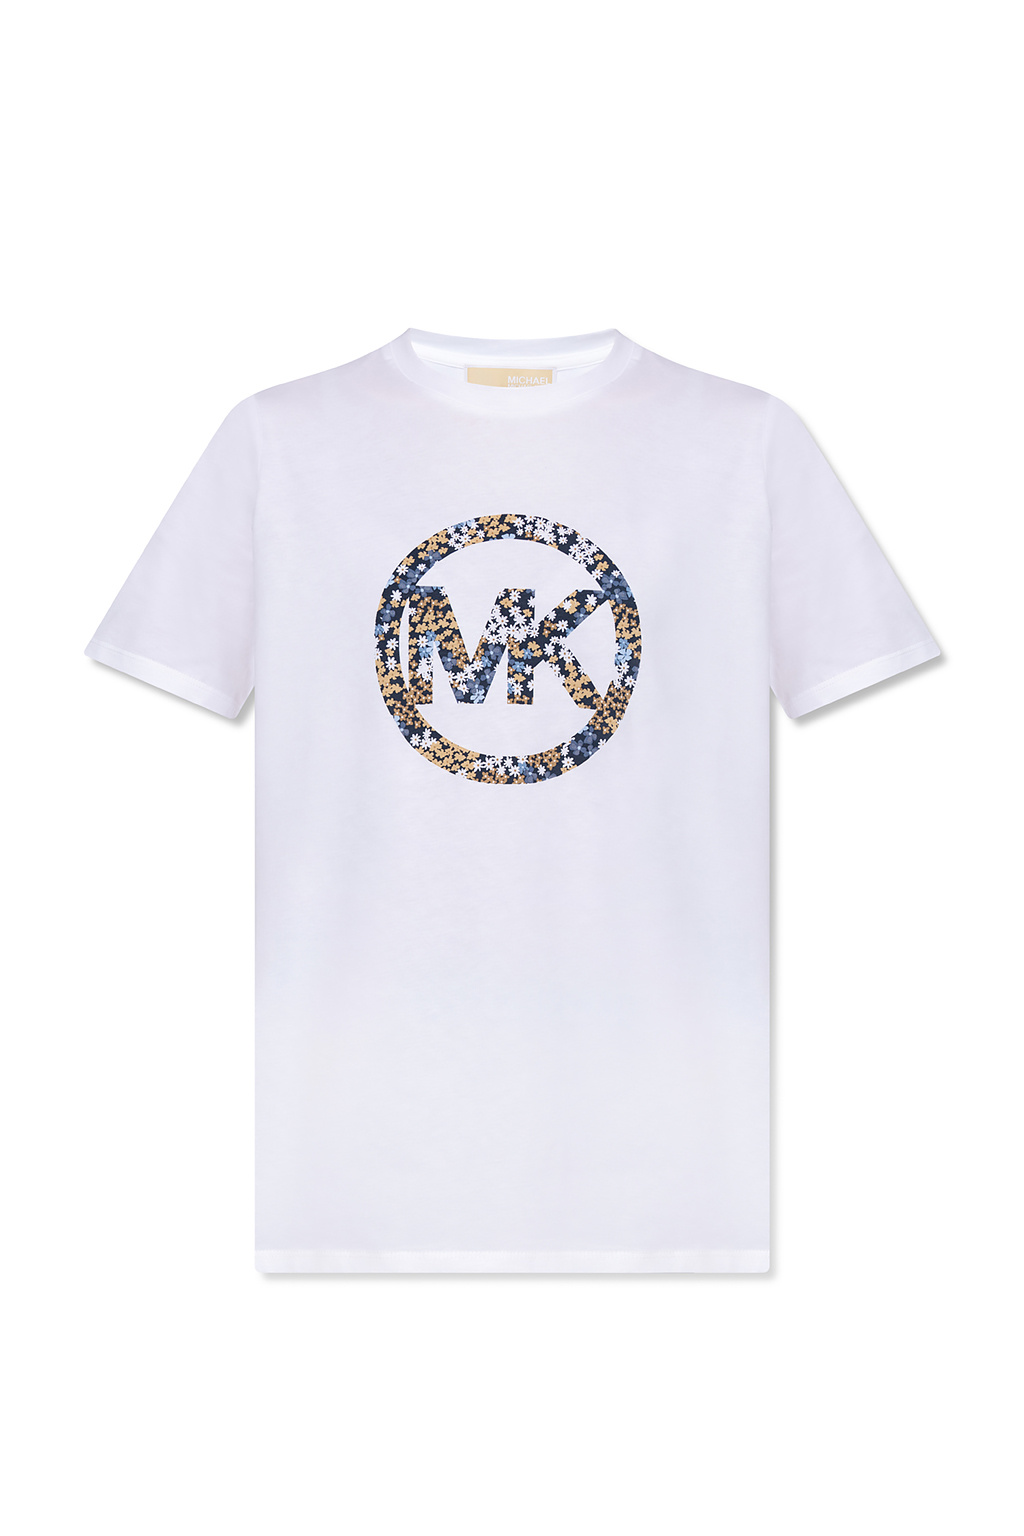 Michael Kors Outlet Michael tshirt in cotton jersey with logo  Black  Michael  Kors tshirt MB95MP197J online on GIGLIOCOM